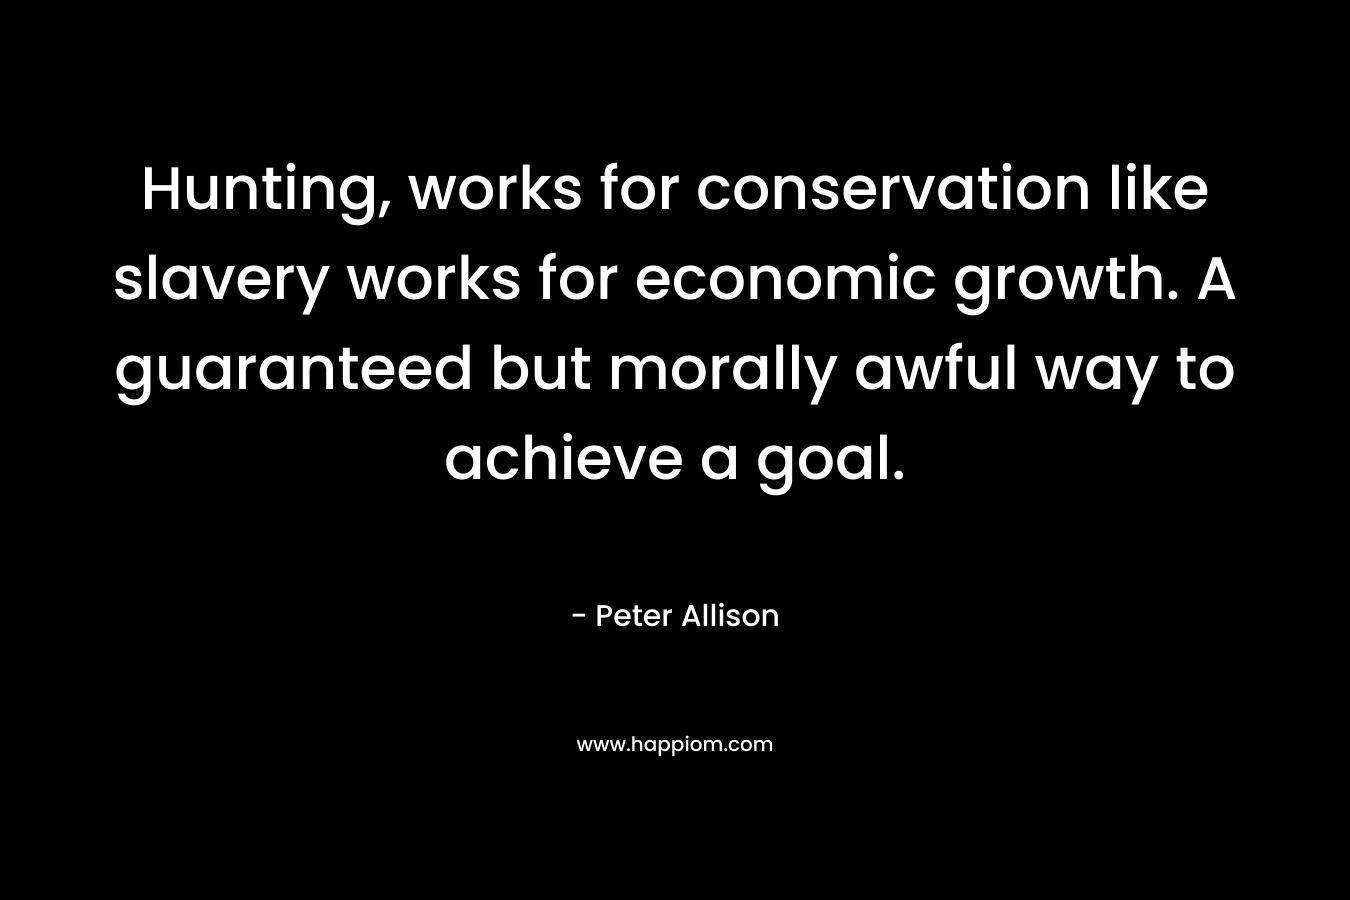 Hunting, works for conservation like slavery works for economic growth. A guaranteed but morally awful way to achieve a goal. – Peter Allison